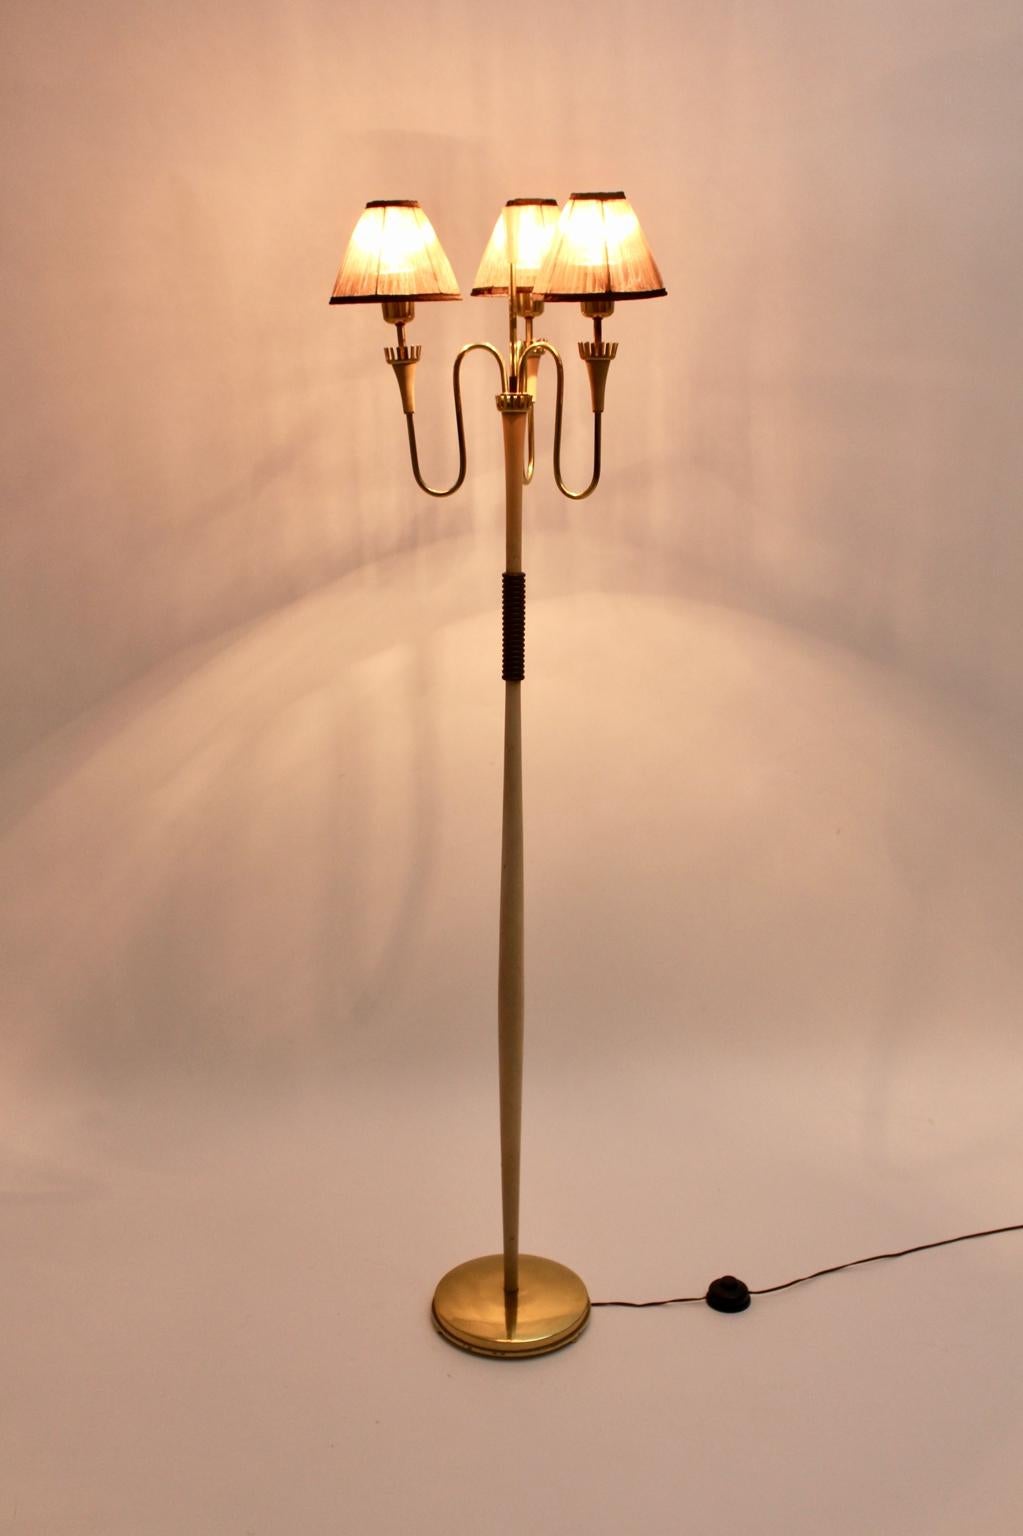 Lacquered Mid-Century Modern Brass White Vintage Floor Lamp Style Gio Ponti, 1940s, Italy For Sale